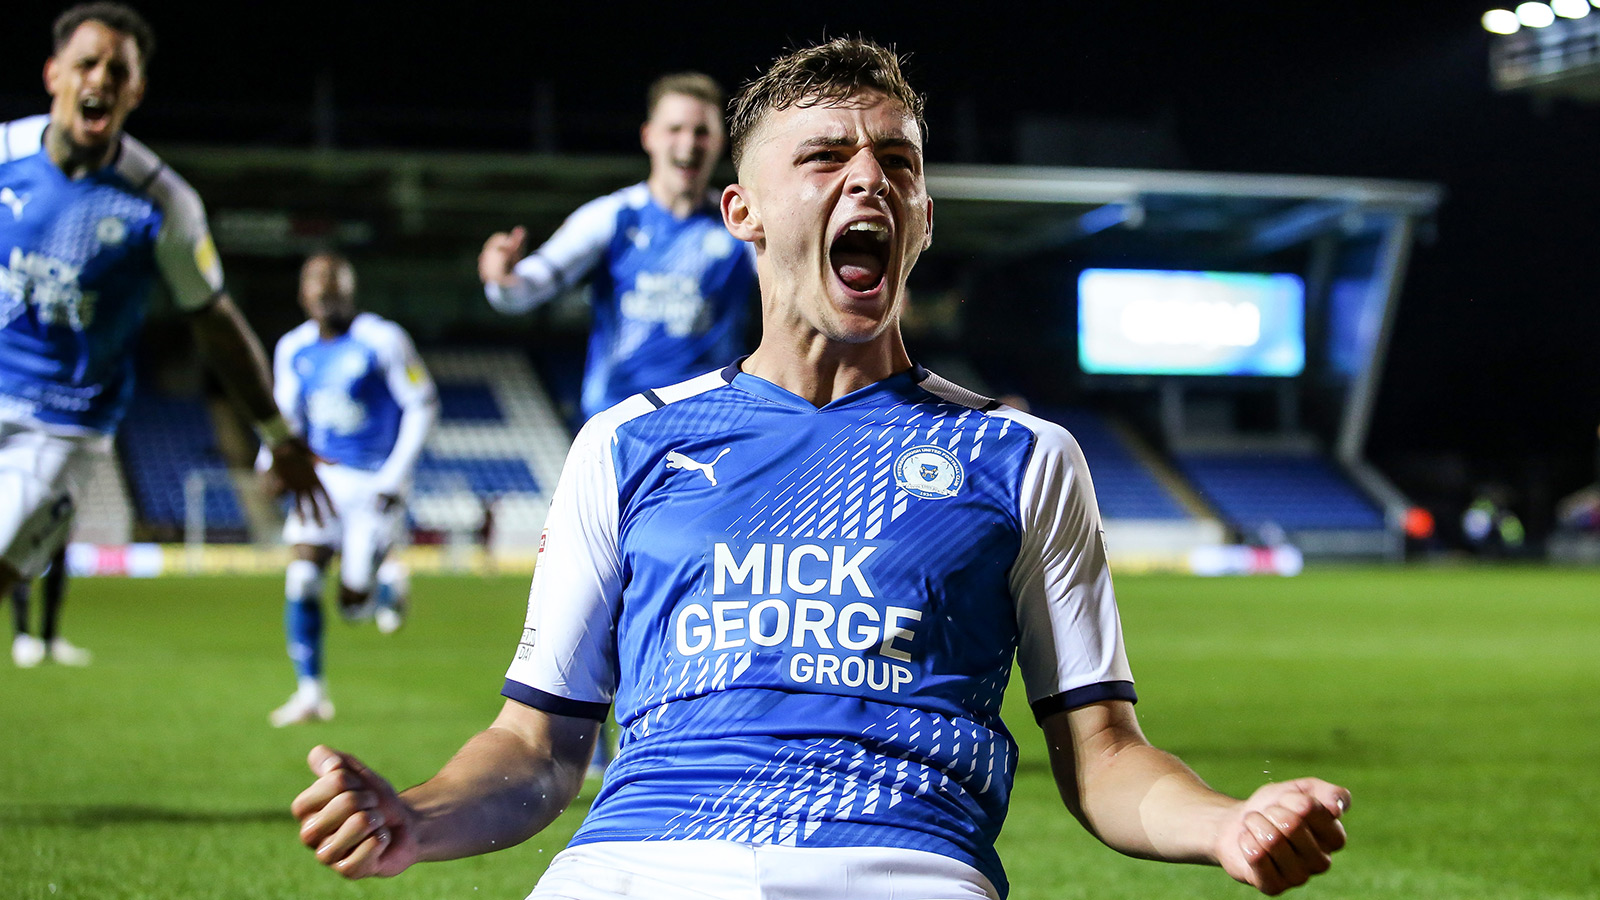 17th August '21 | One of our own, Harrison Burrows, celebrates scoring against Cardiff City